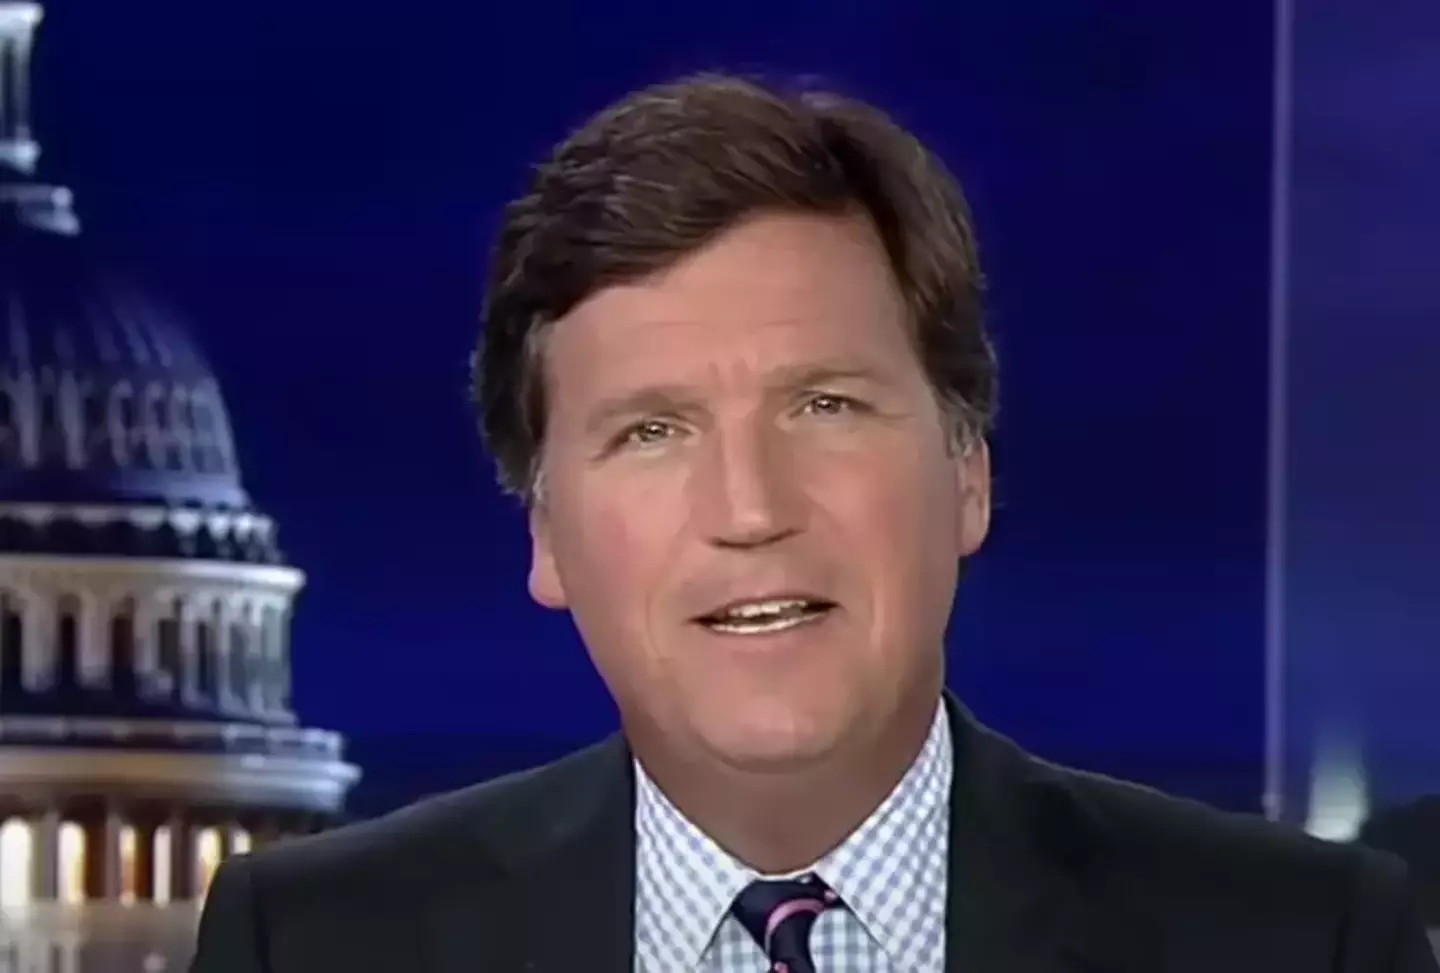 The shocking discovery of 'highly offensive' texts from Tucker Carlson led to him being let go by Fox News.